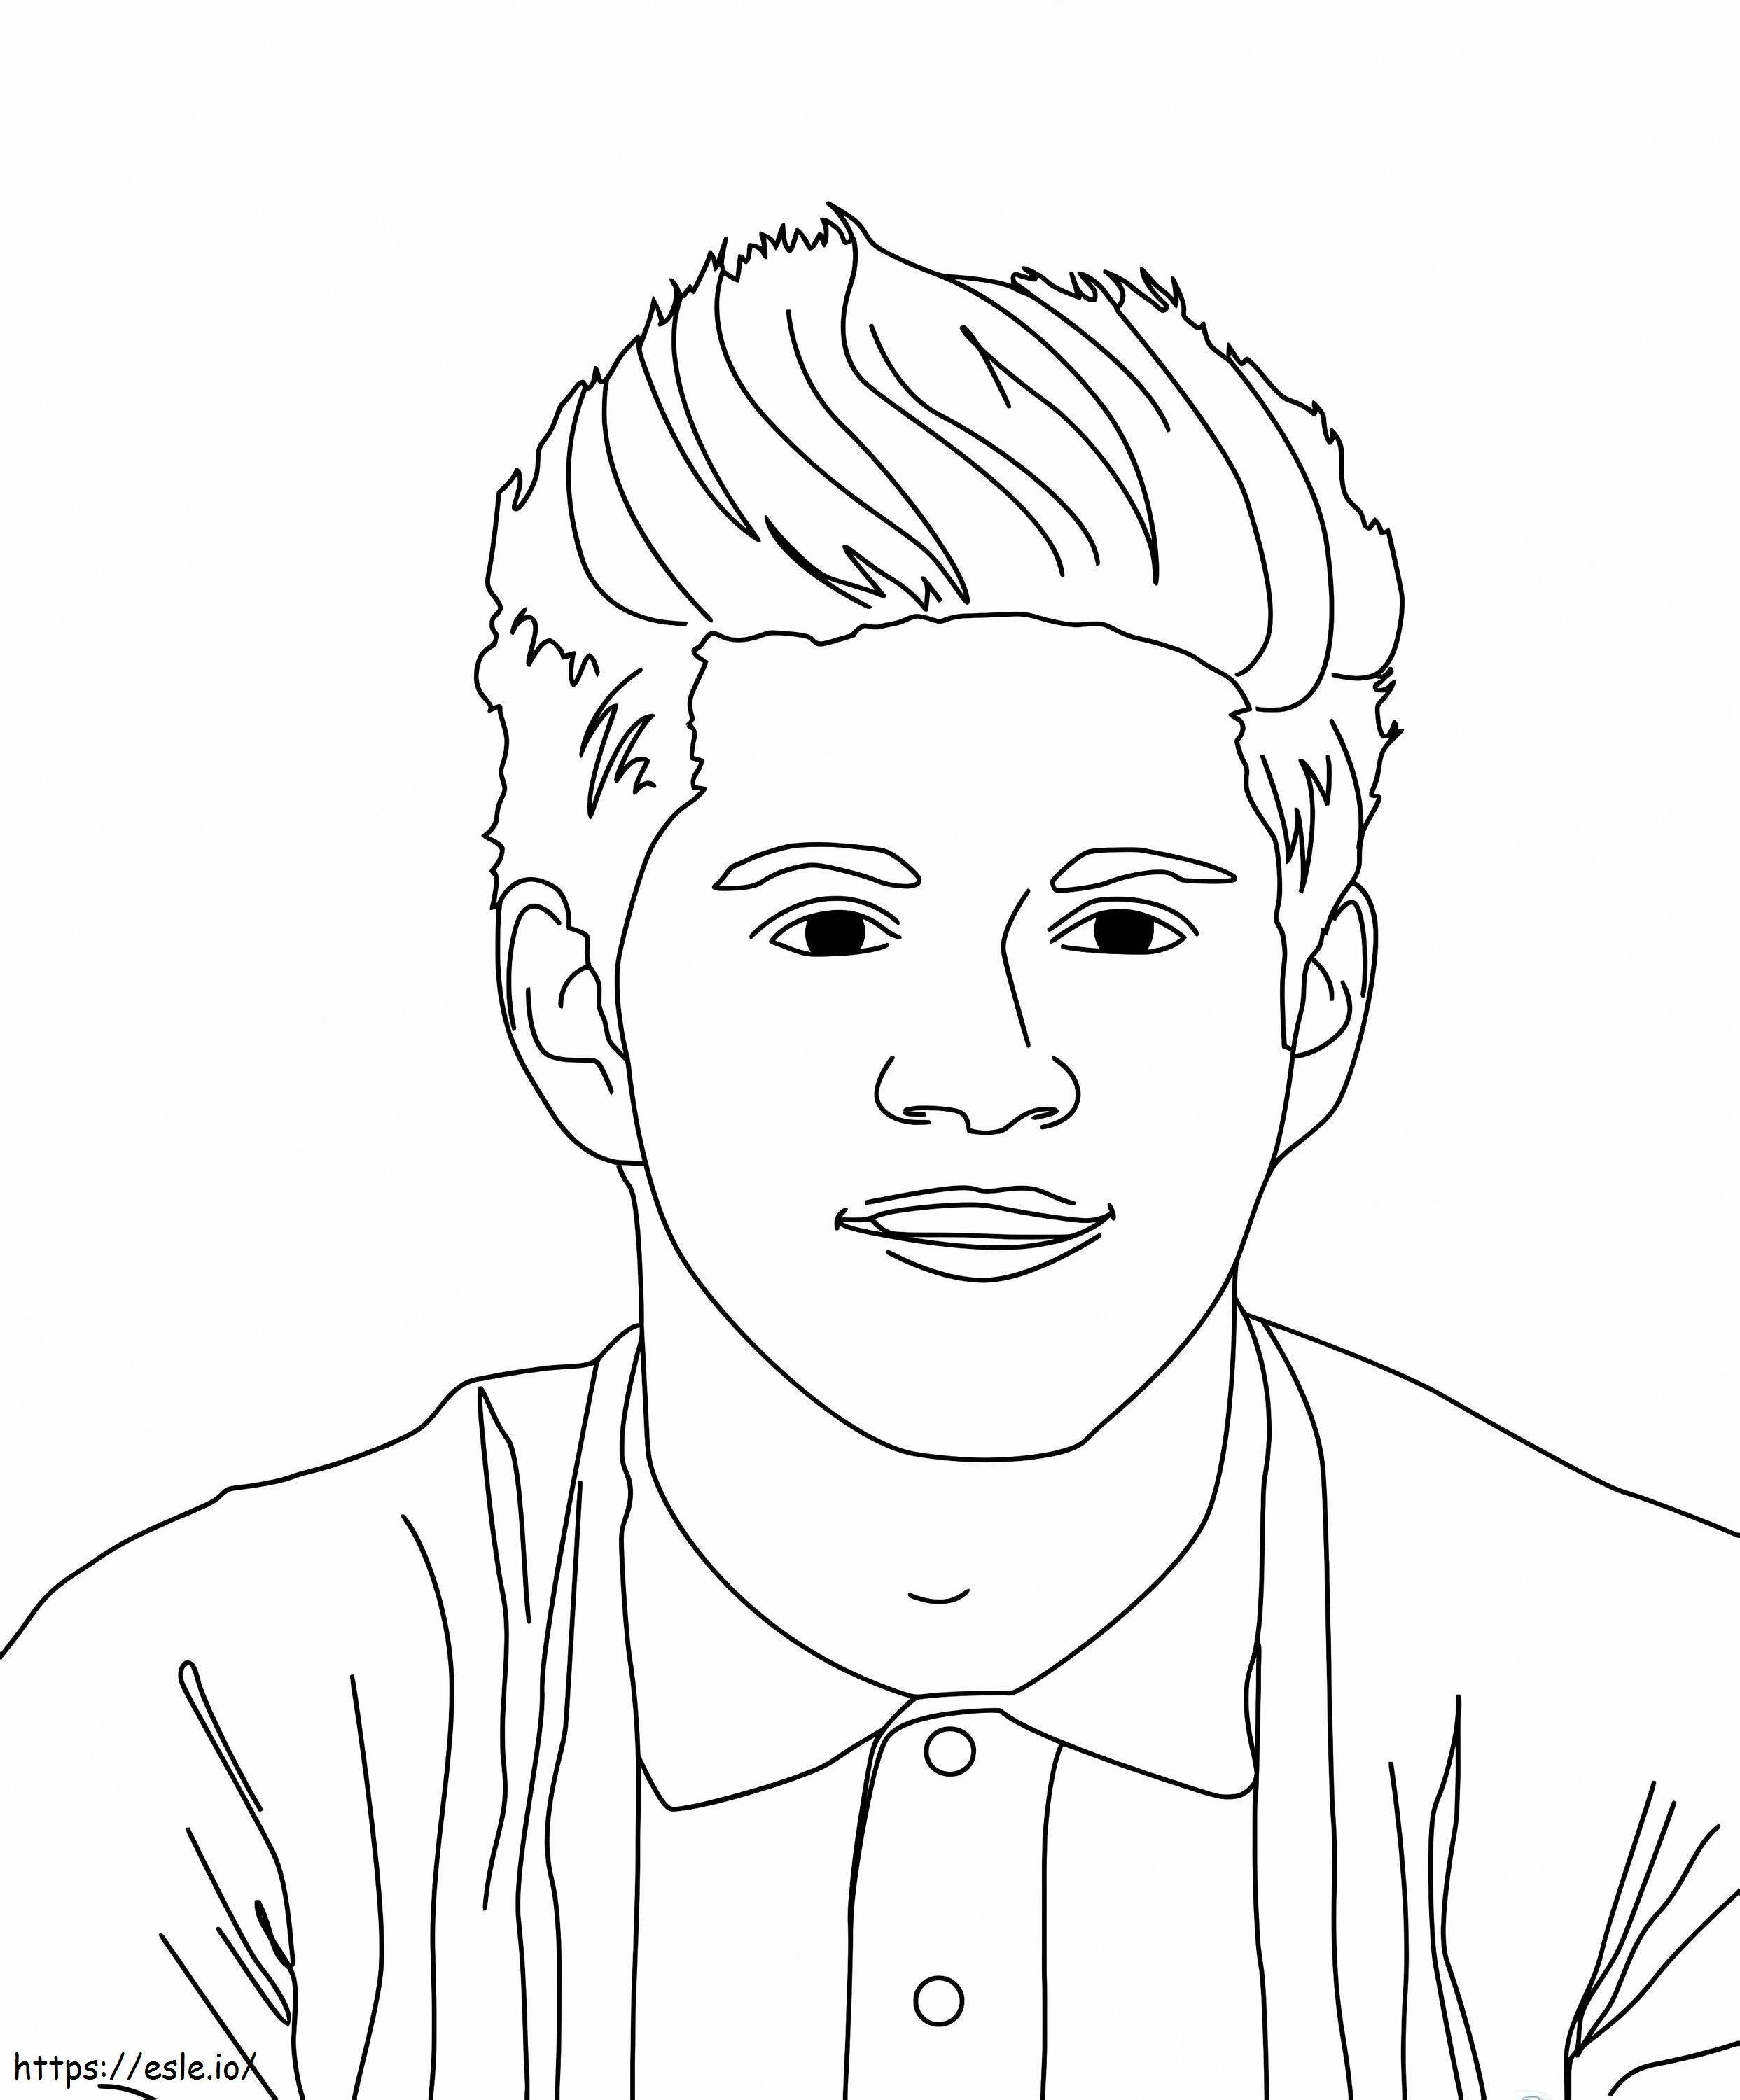 Coloriage Niall Horan One Direction 1 à imprimer dessin